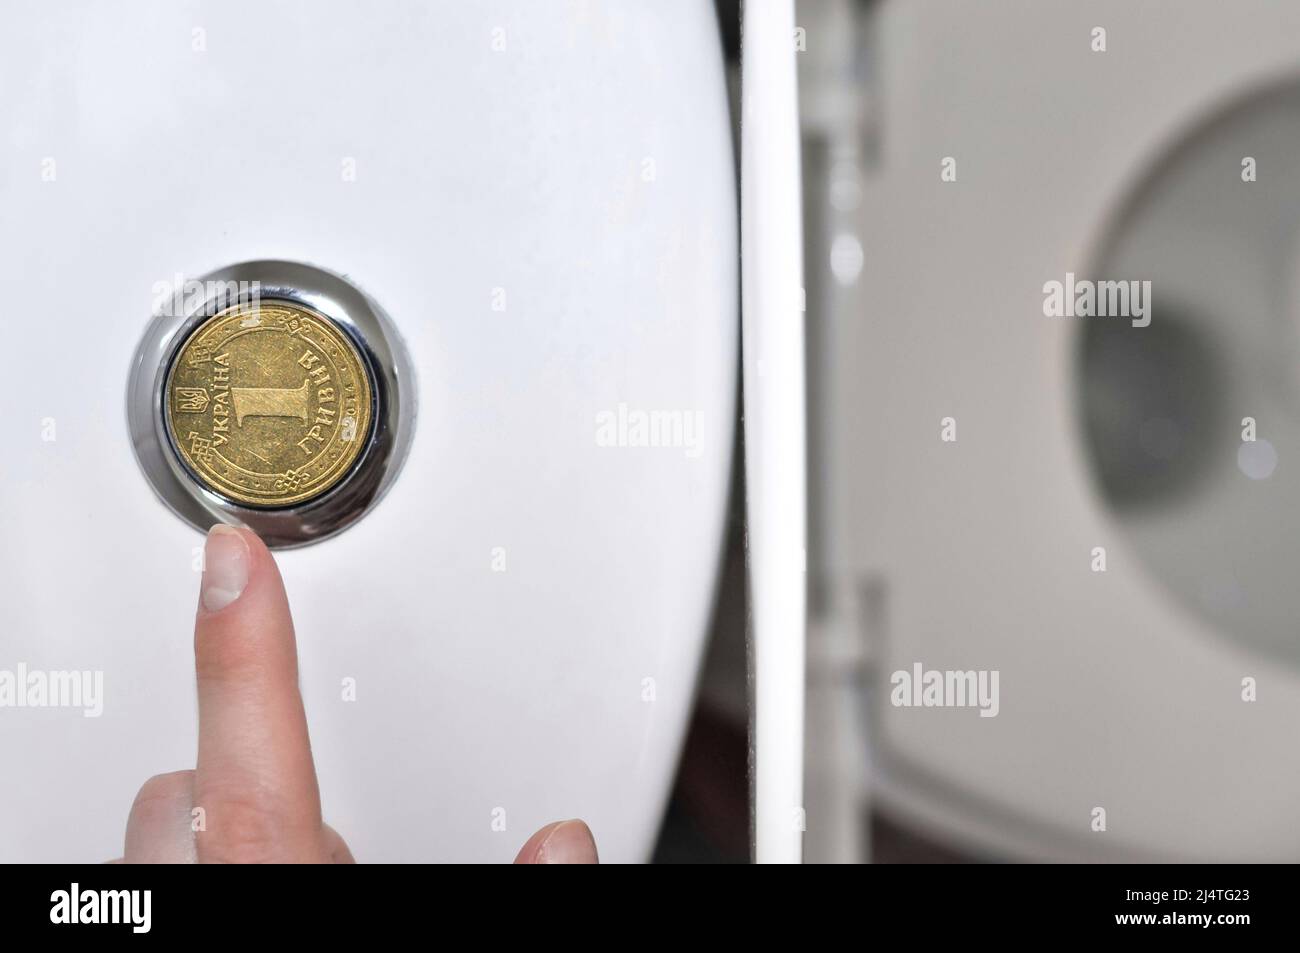 faucets in the bathroom with a Ukrainian hryvnia coin, translation from Ukrainian: one hryvnia, ukraine.  Stock Photo